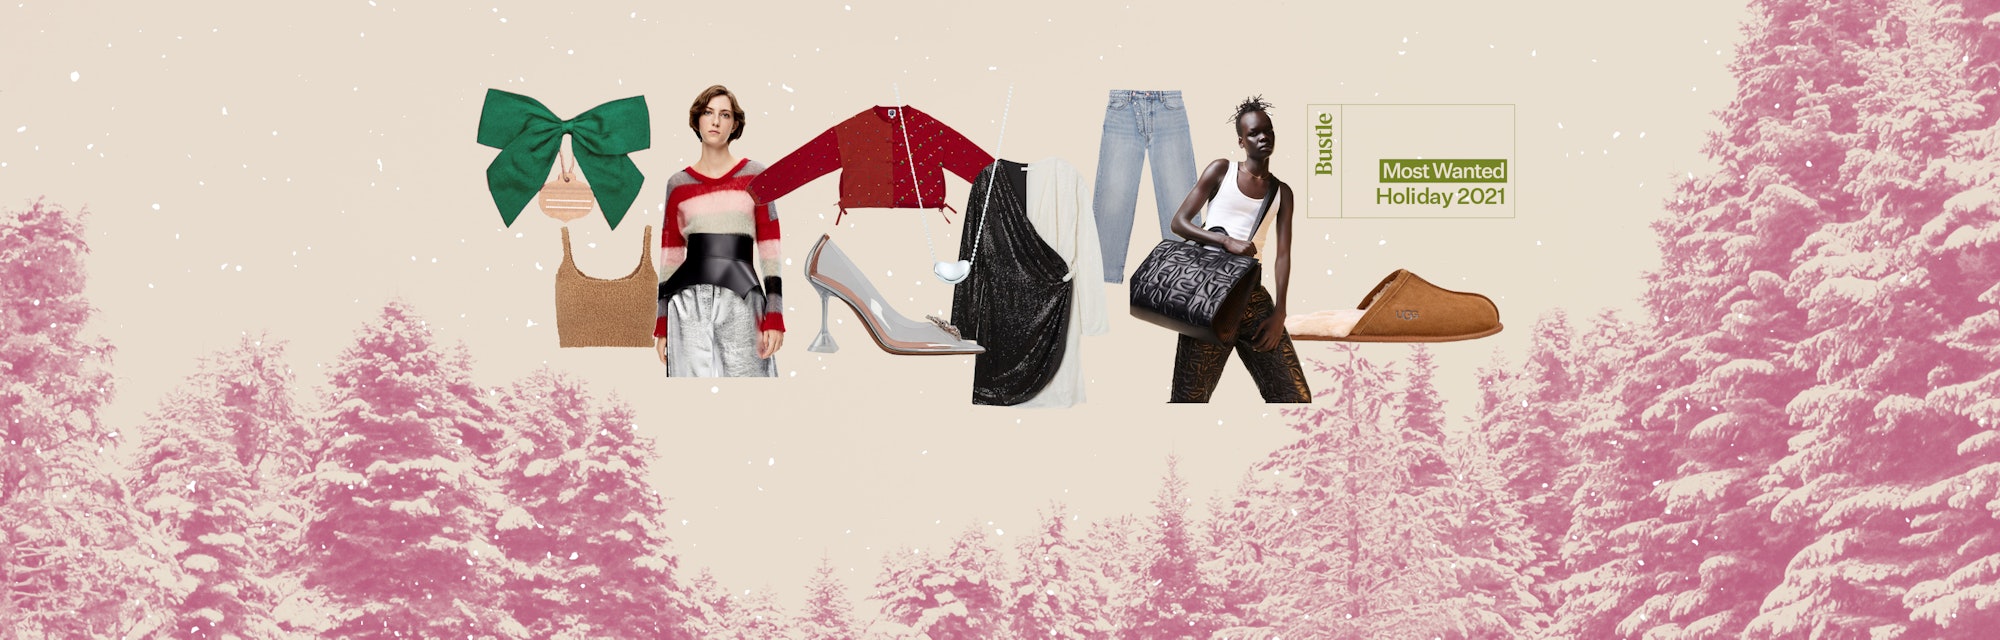 Check out 10 fashion gift ideas for your most stylish friend, from Skims bralettes to Telfar bags co...